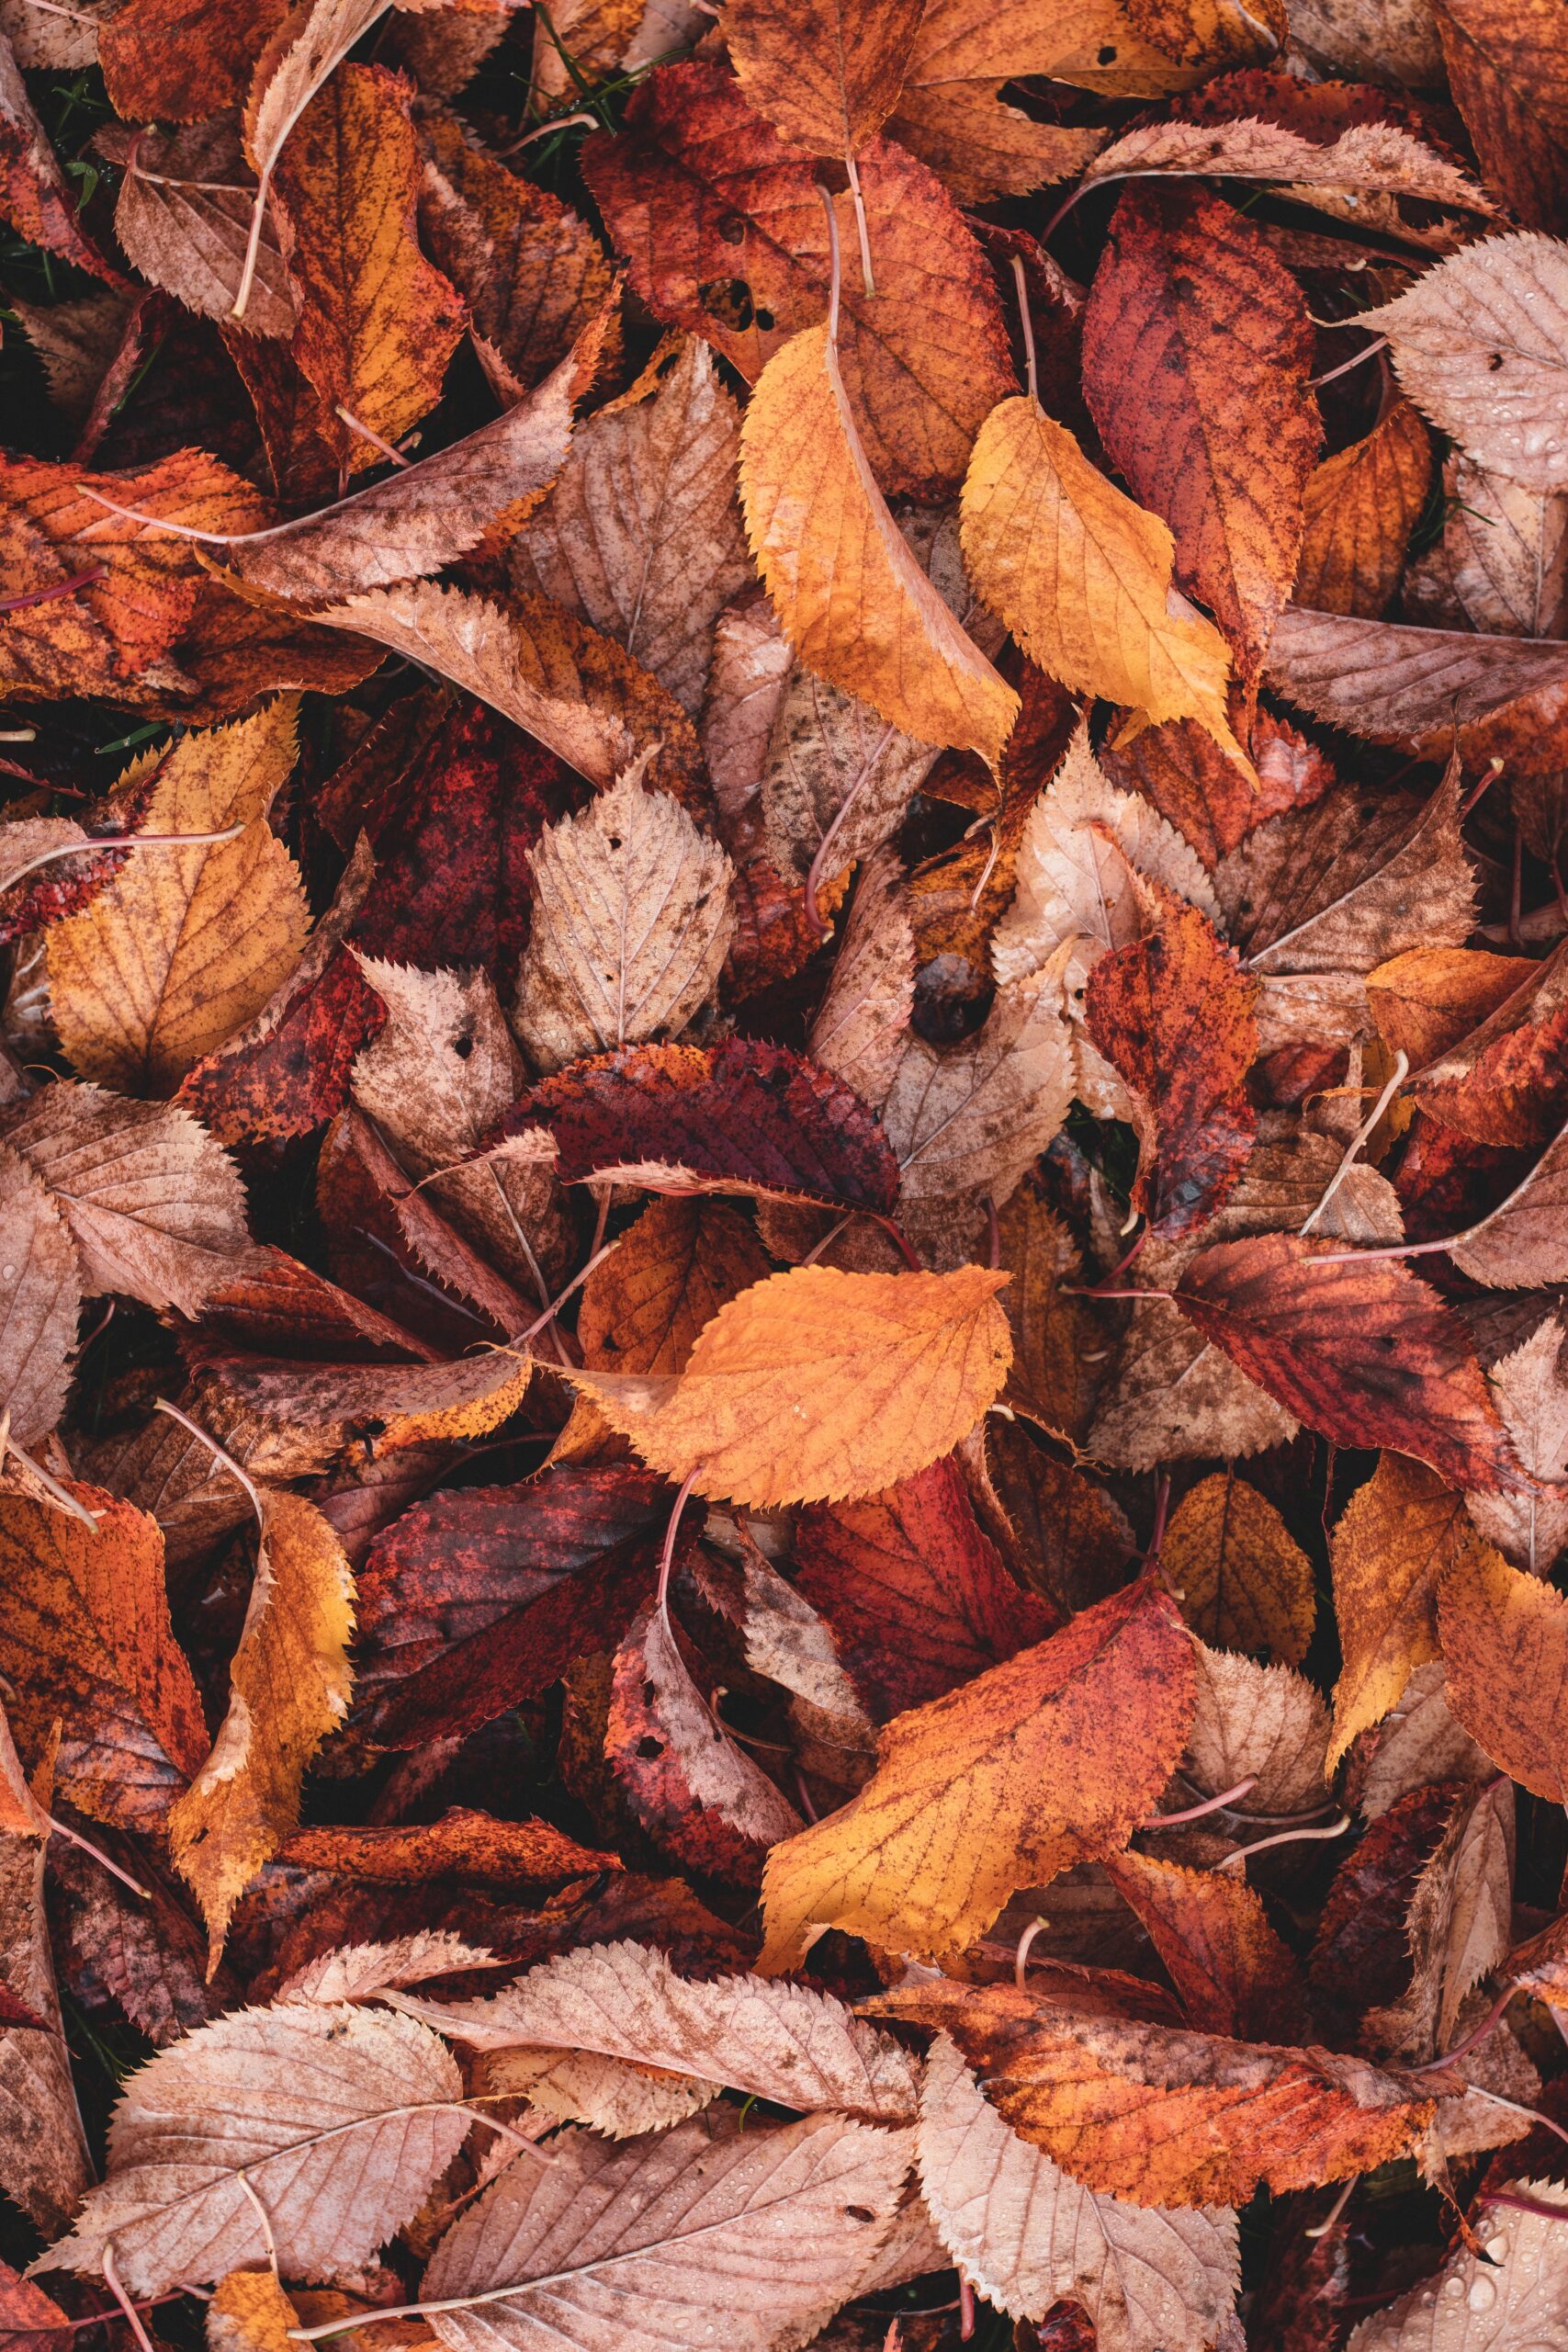 A pile of autumn leaves